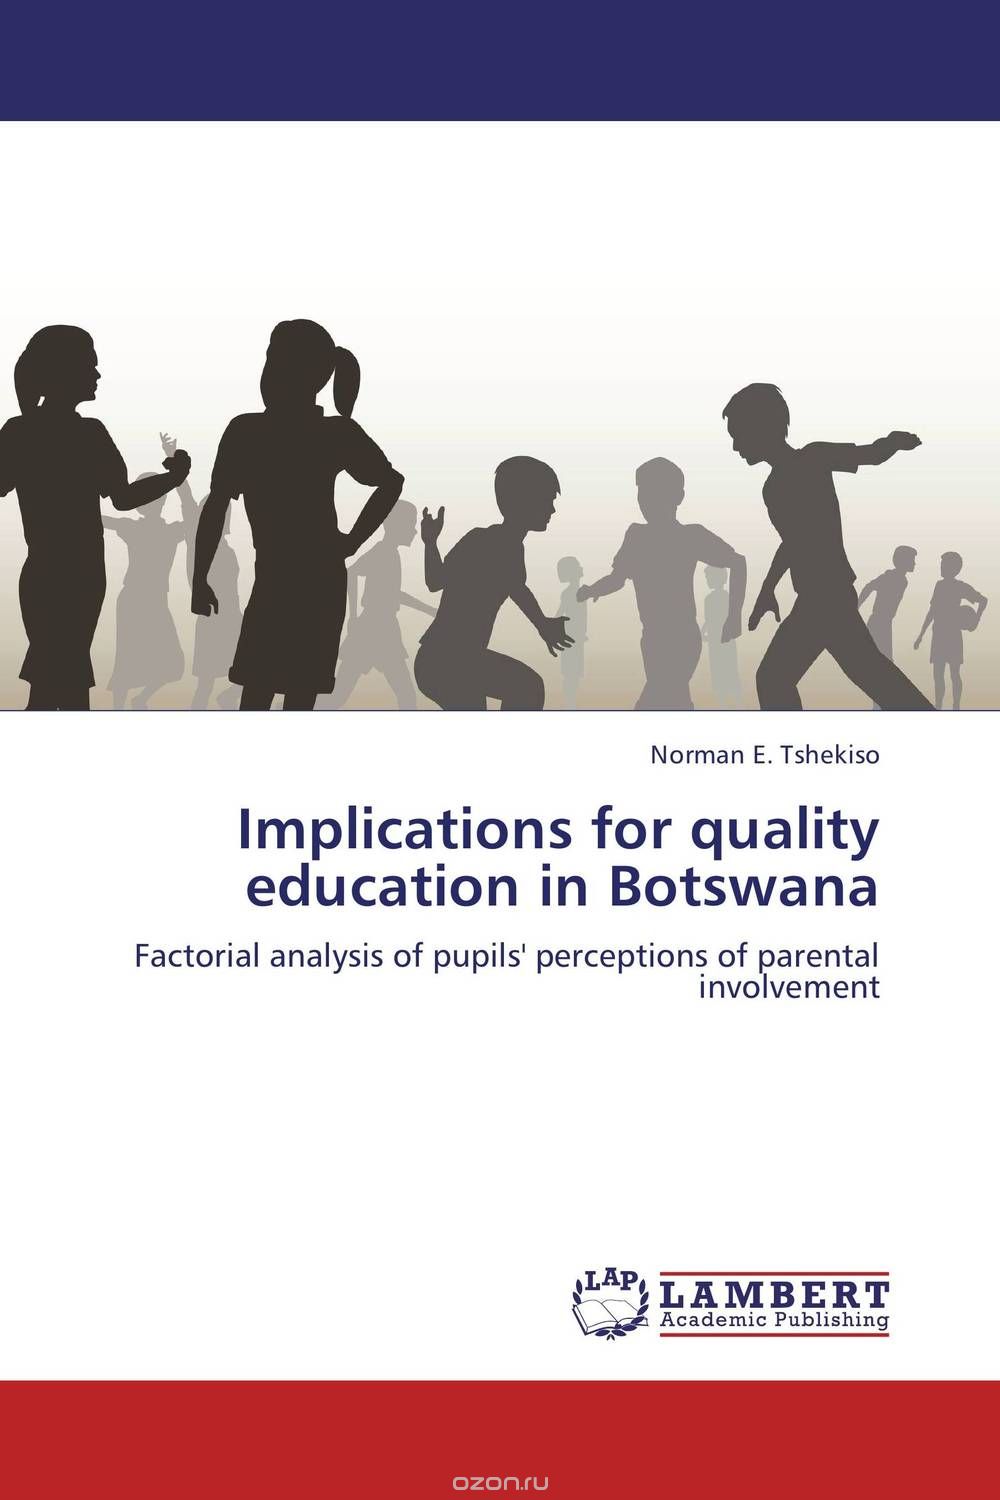 Implications for quality education in Botswana